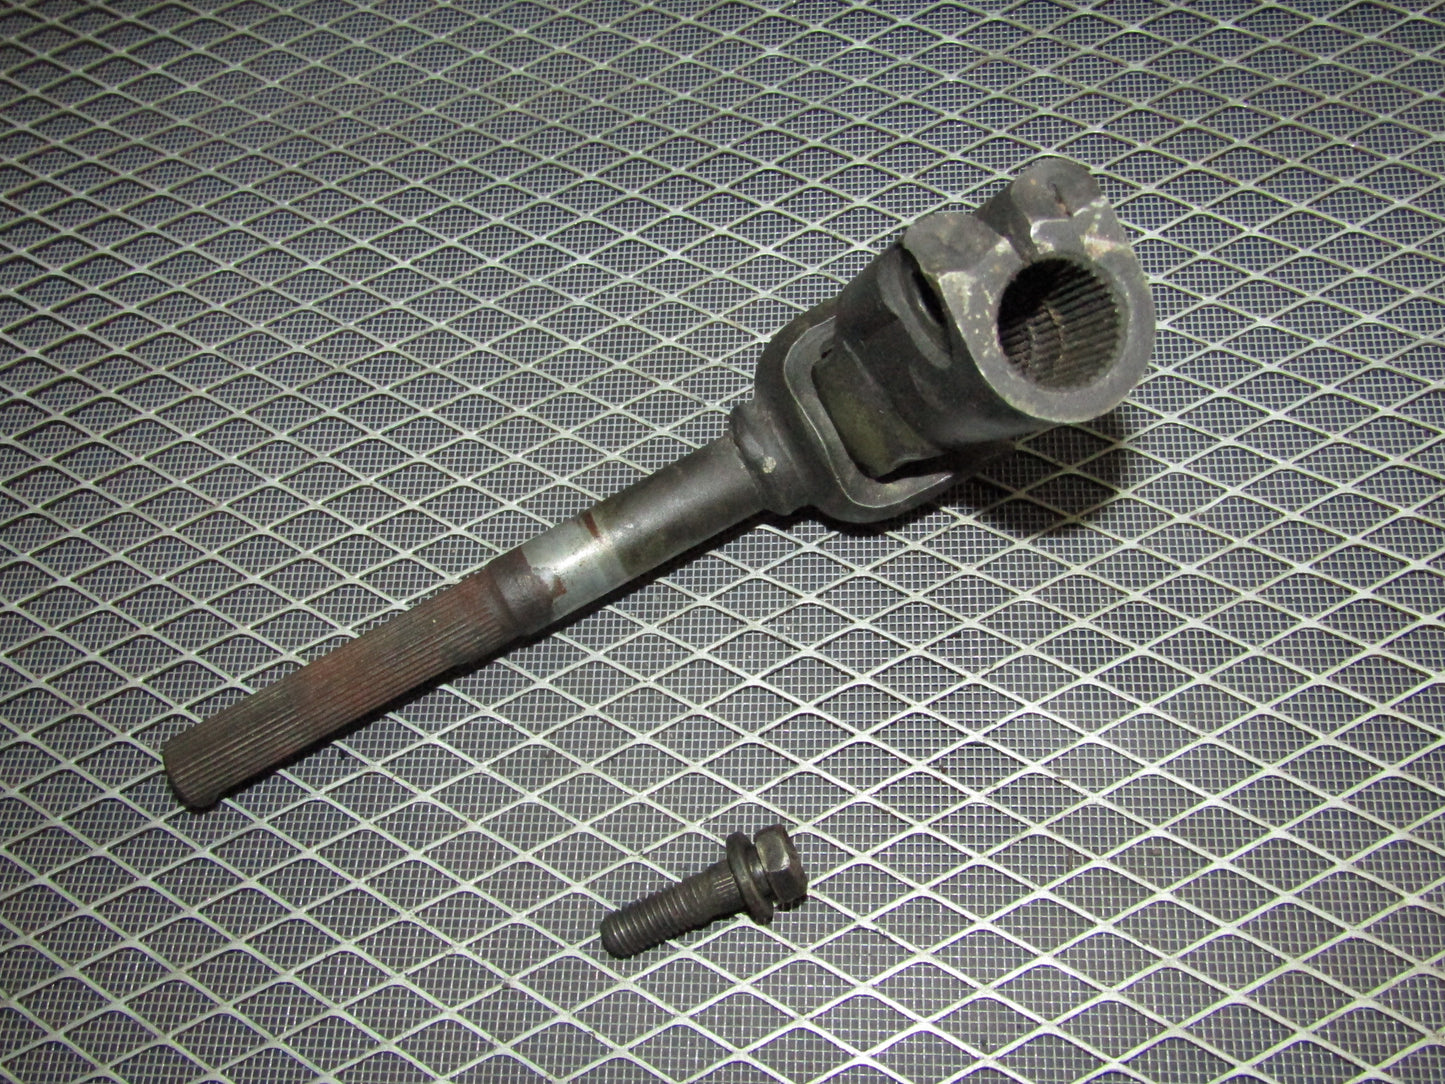 92-96 Toyota Camry OEM Steering Column Universal Joint U-Joint